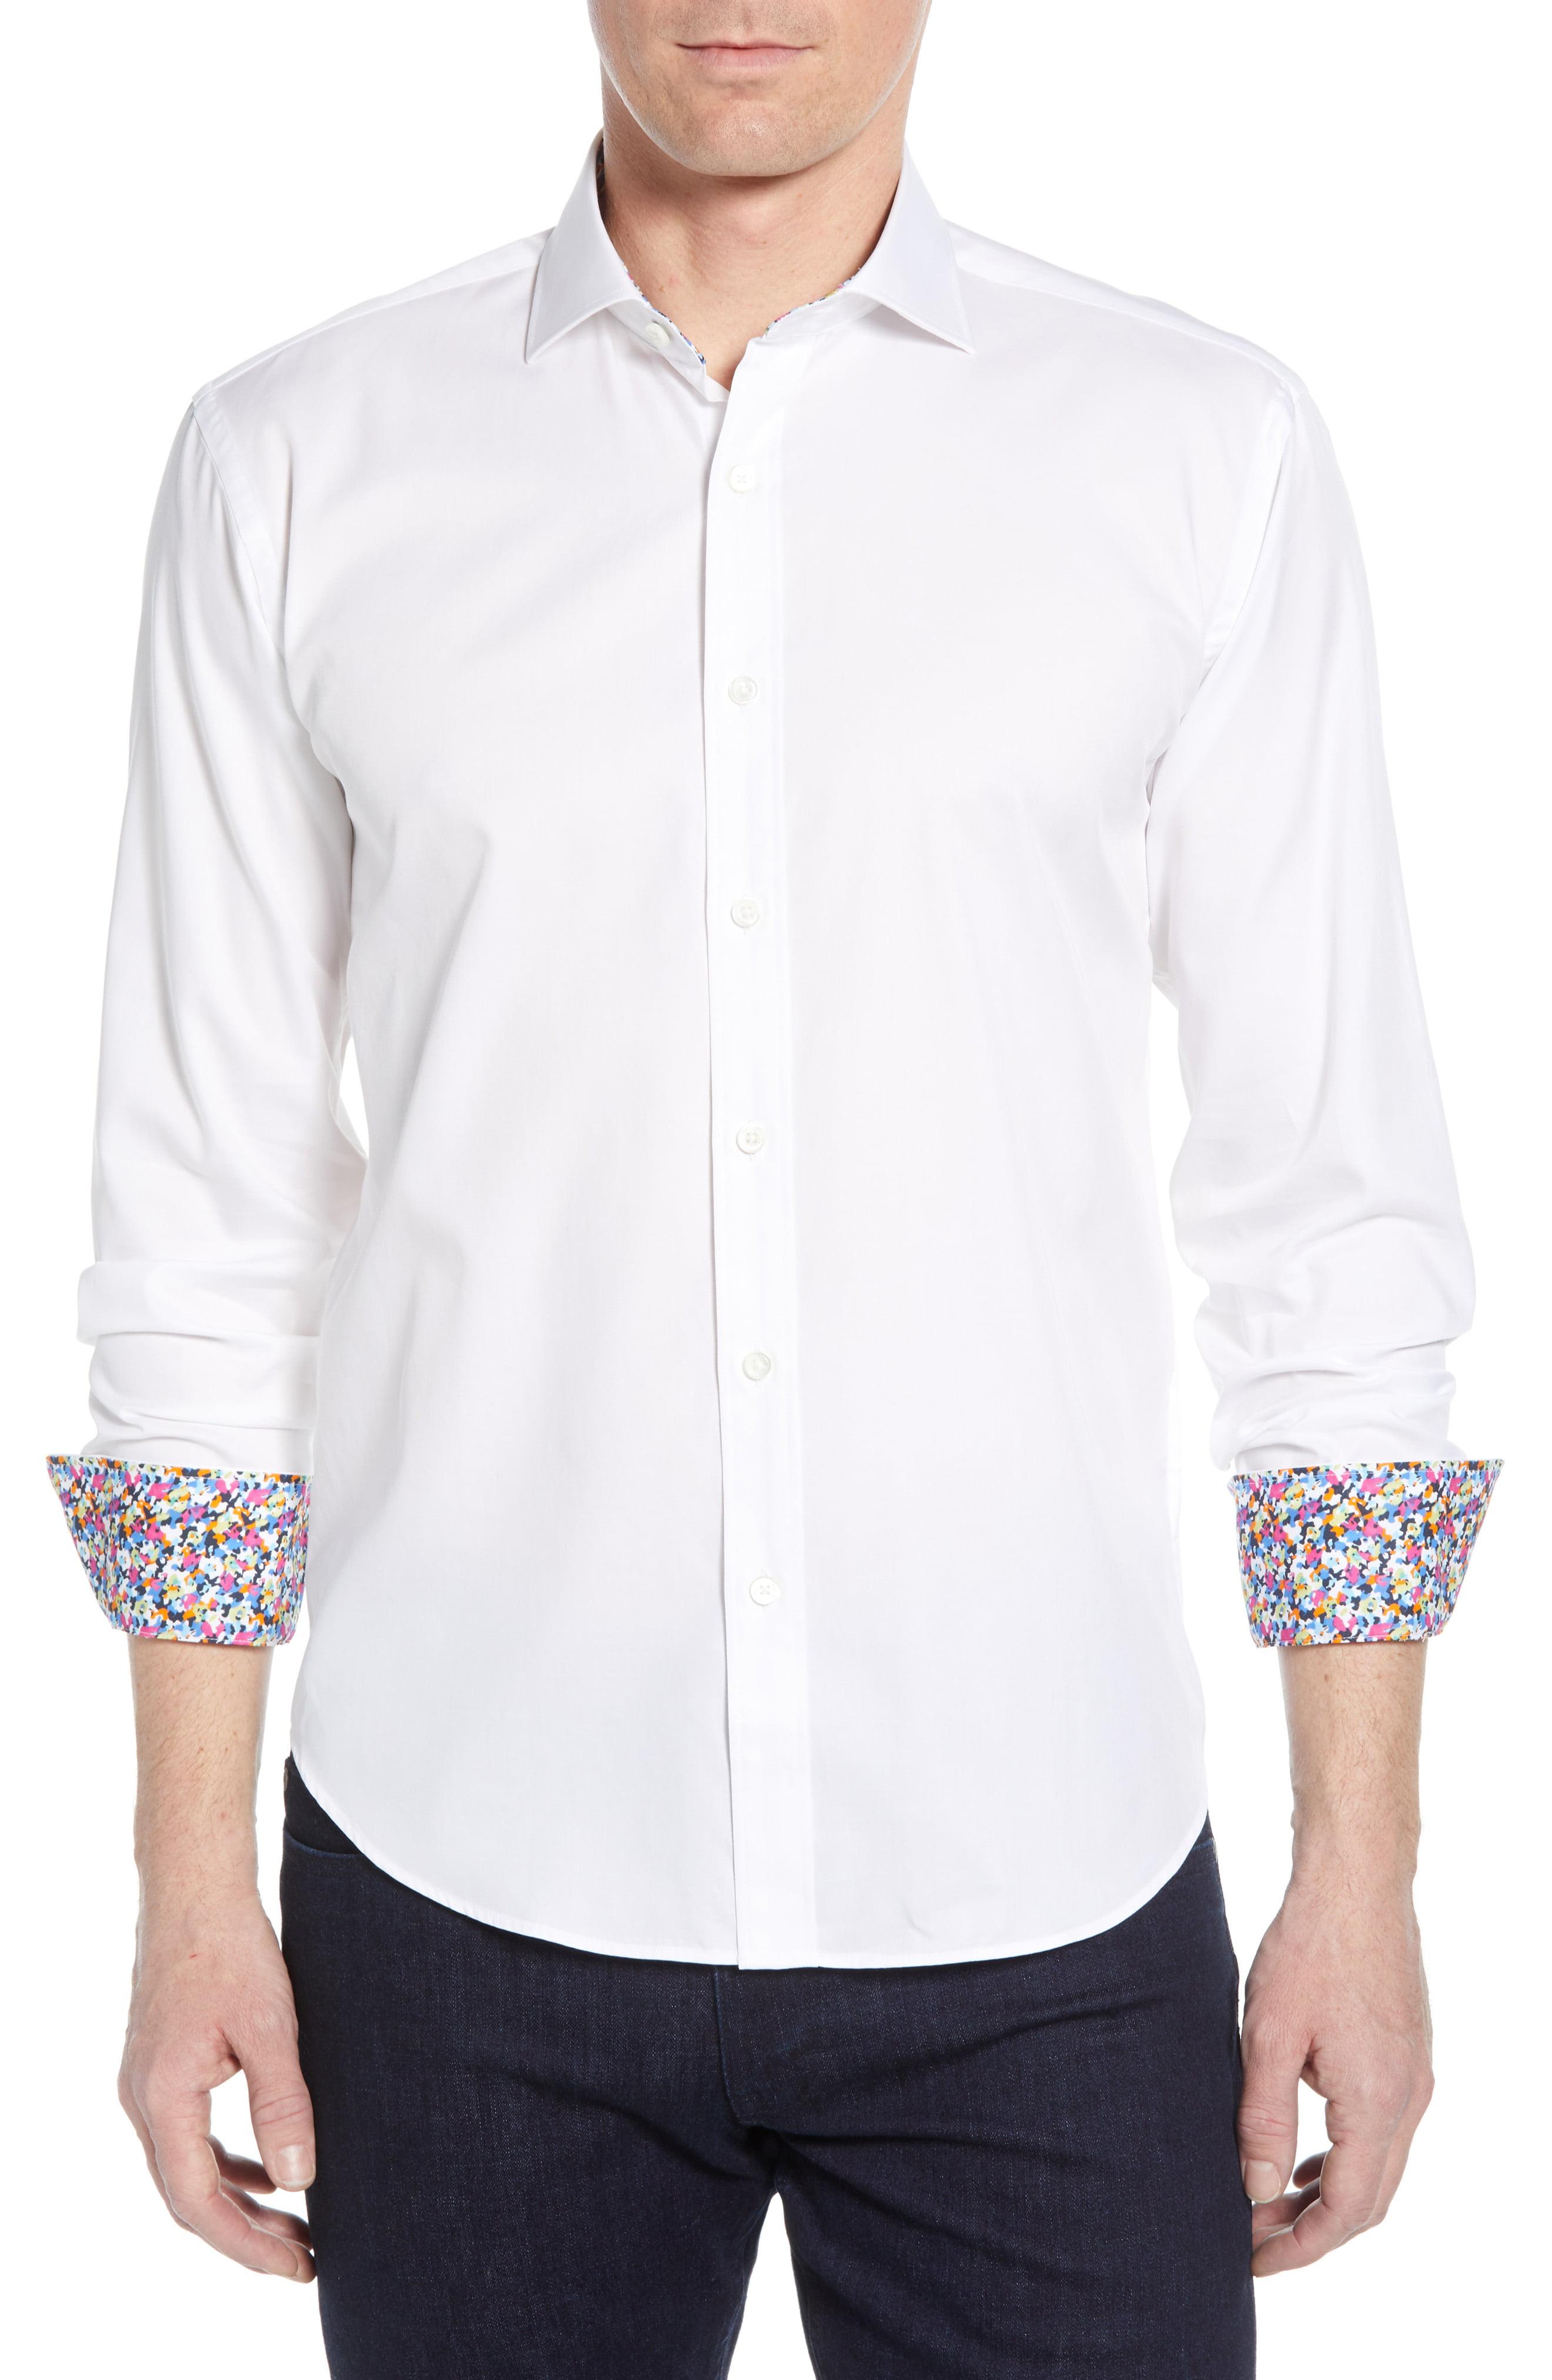 Lyst - Bugatchi Shaped Fit Floral Cuff Cotton Sport Shirt in White for Men